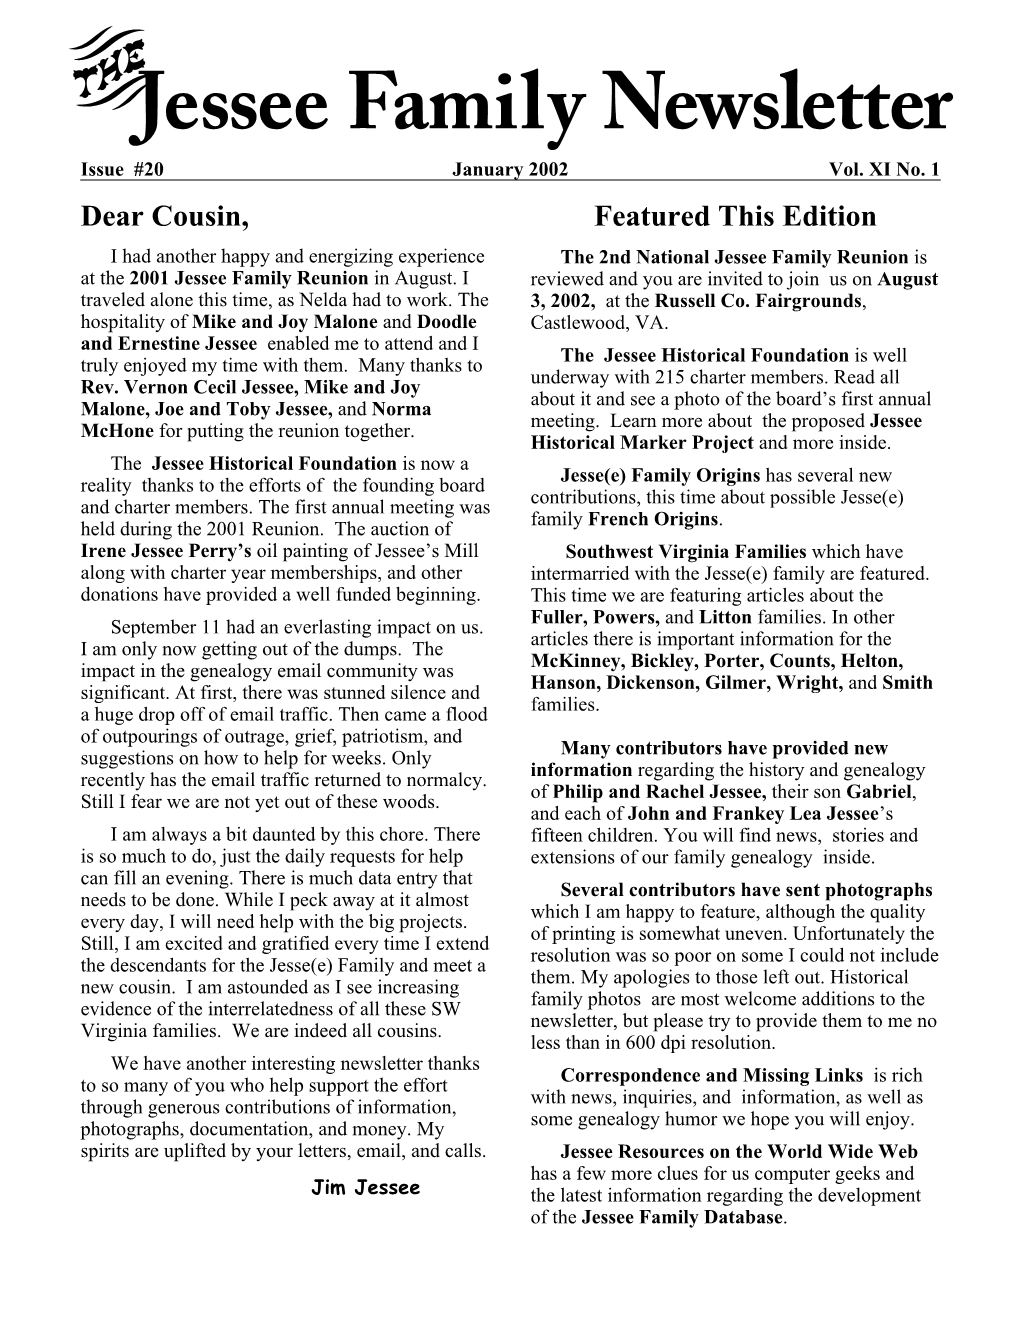 Dear Cousin, Featured This Edition I Had Another Happy and Energizing Experience the 2Nd National Jessee Family Reunion Is at the 2001 Jessee Family Reunion in August